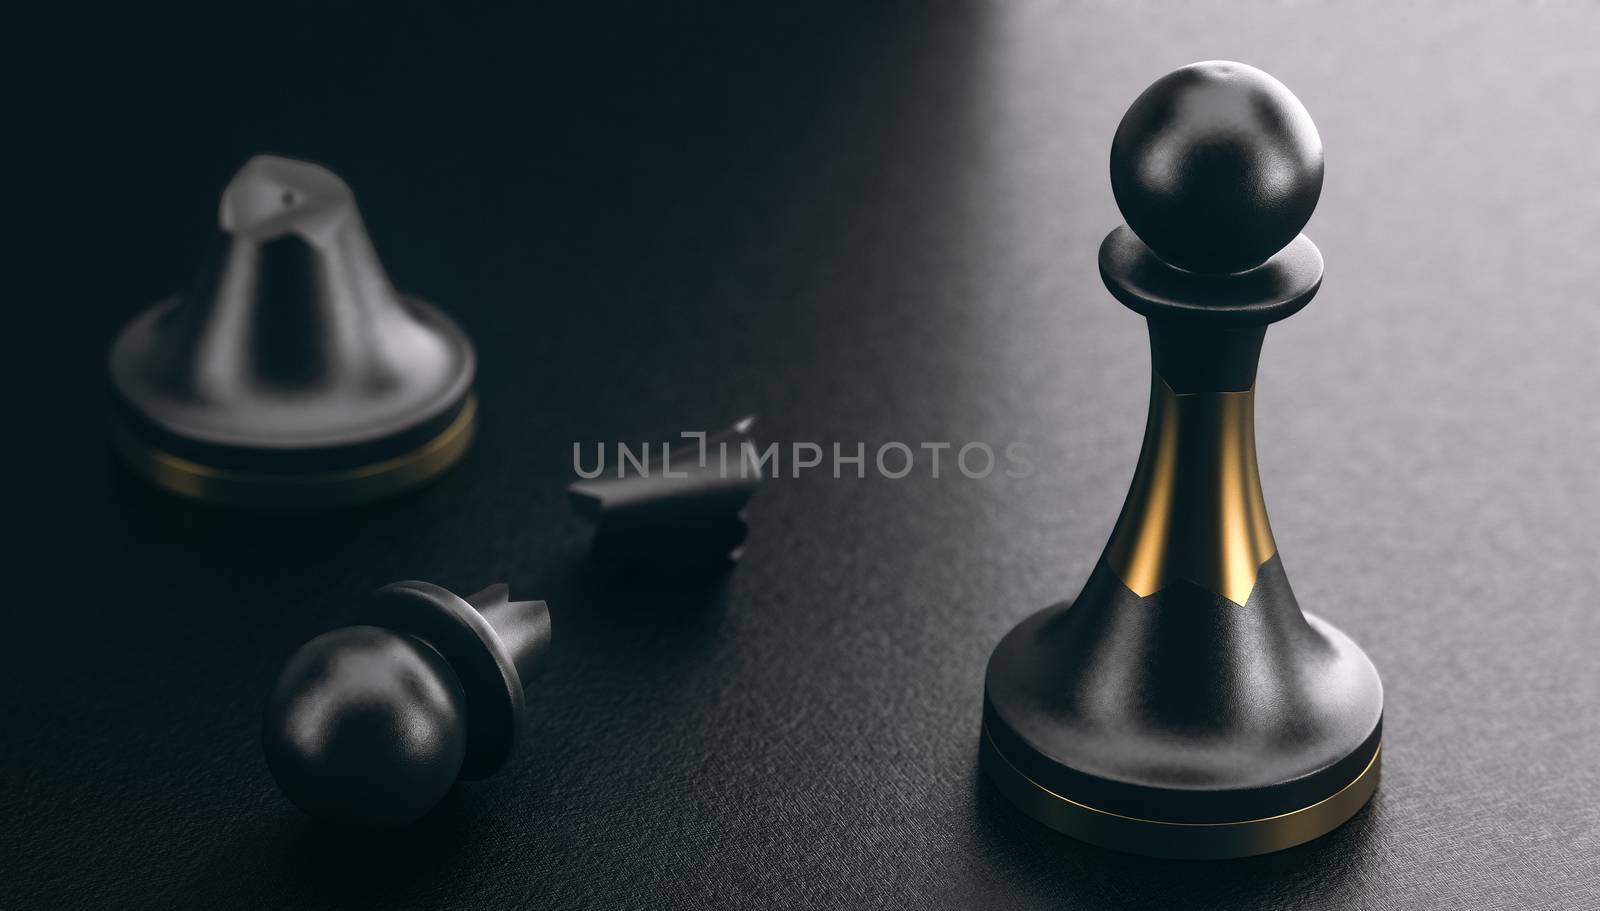 3D illustration of a broken pawn and another one repaired by using of a golden part. Black background. Positive psychology and resilience concept.